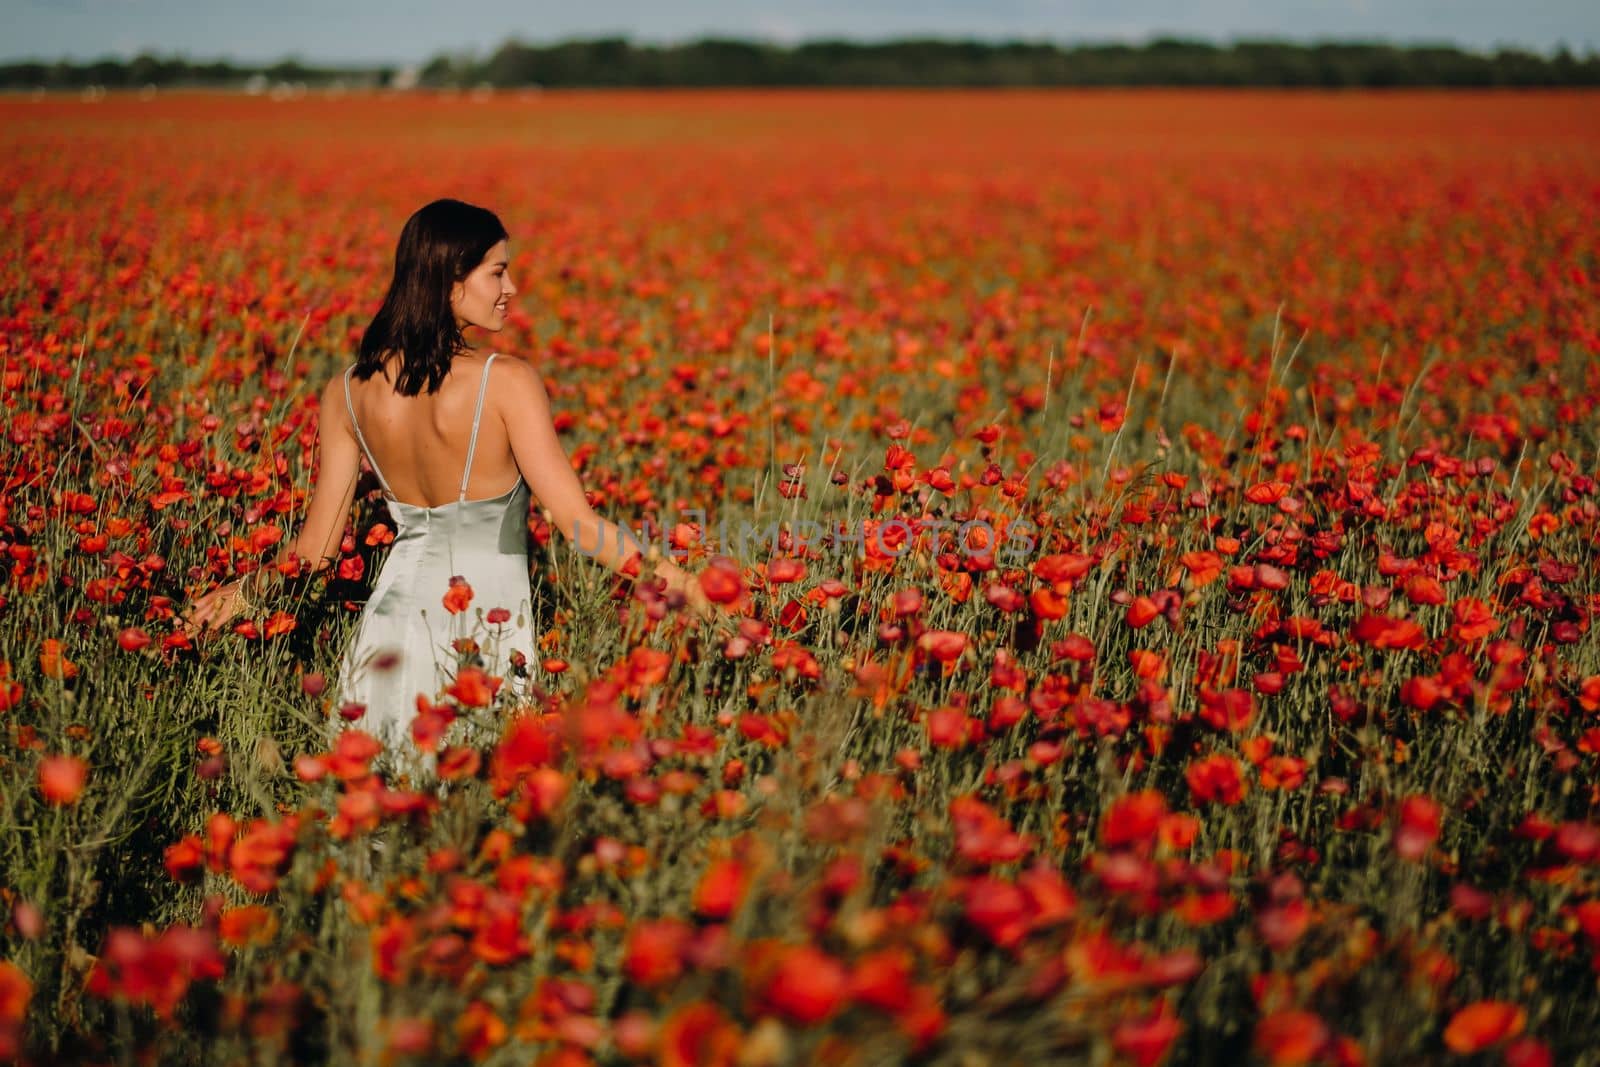 Portrait of a girl in a dress on a poppy field at sunset.